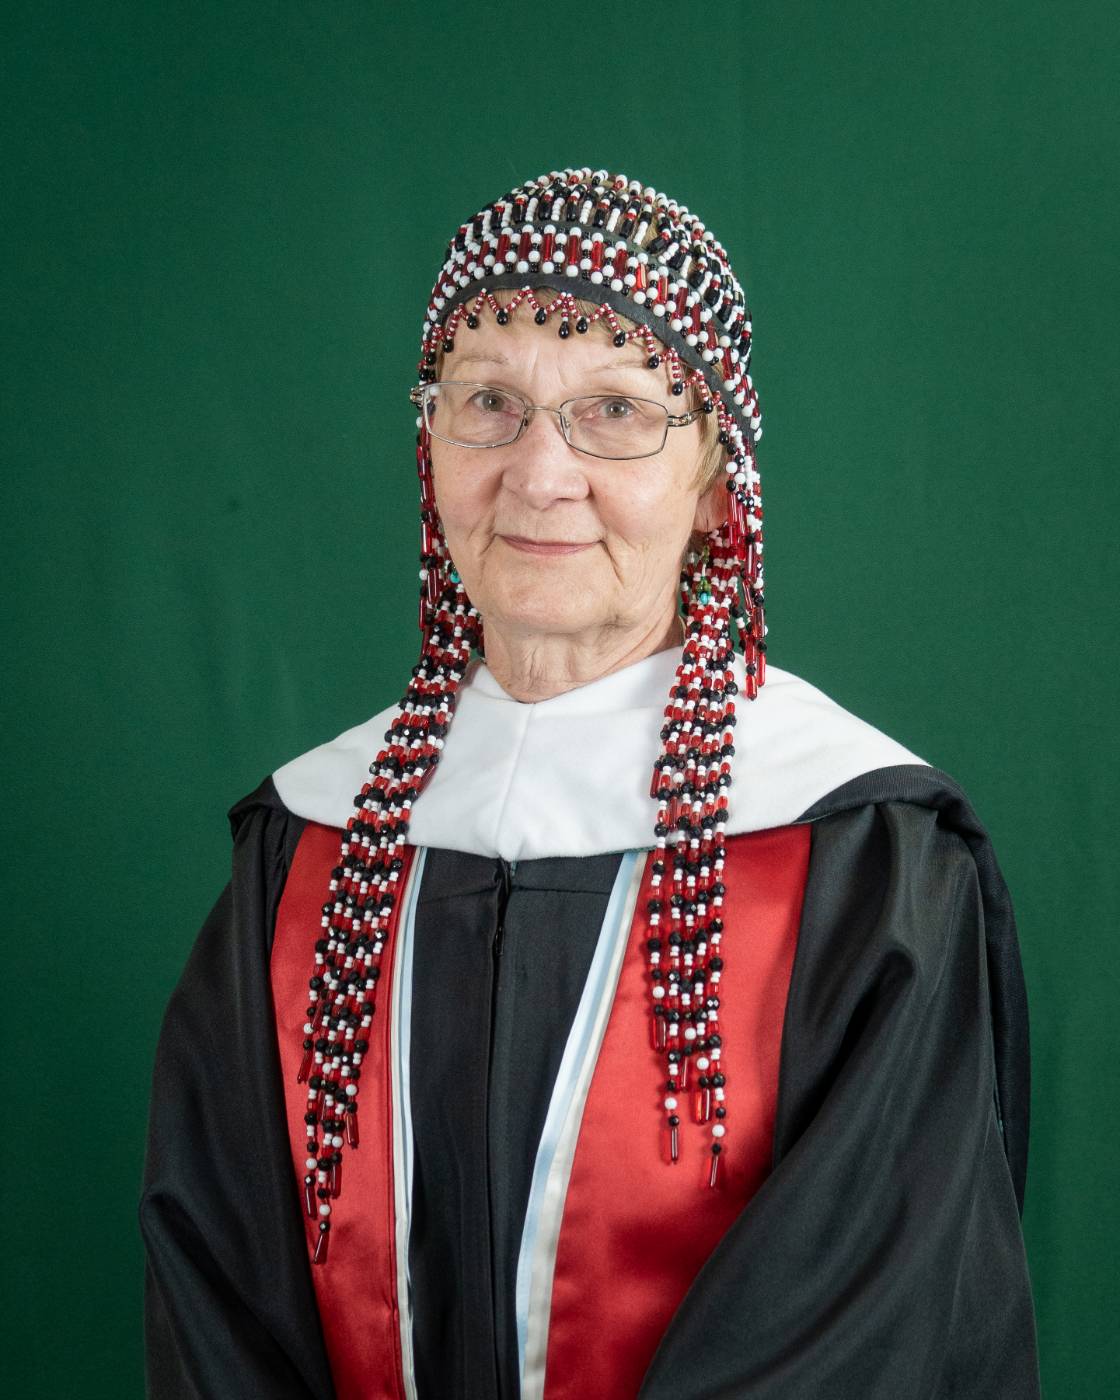 Susan Malutin wearing a ceremonial Alutiiq headpiece and doctoral robes